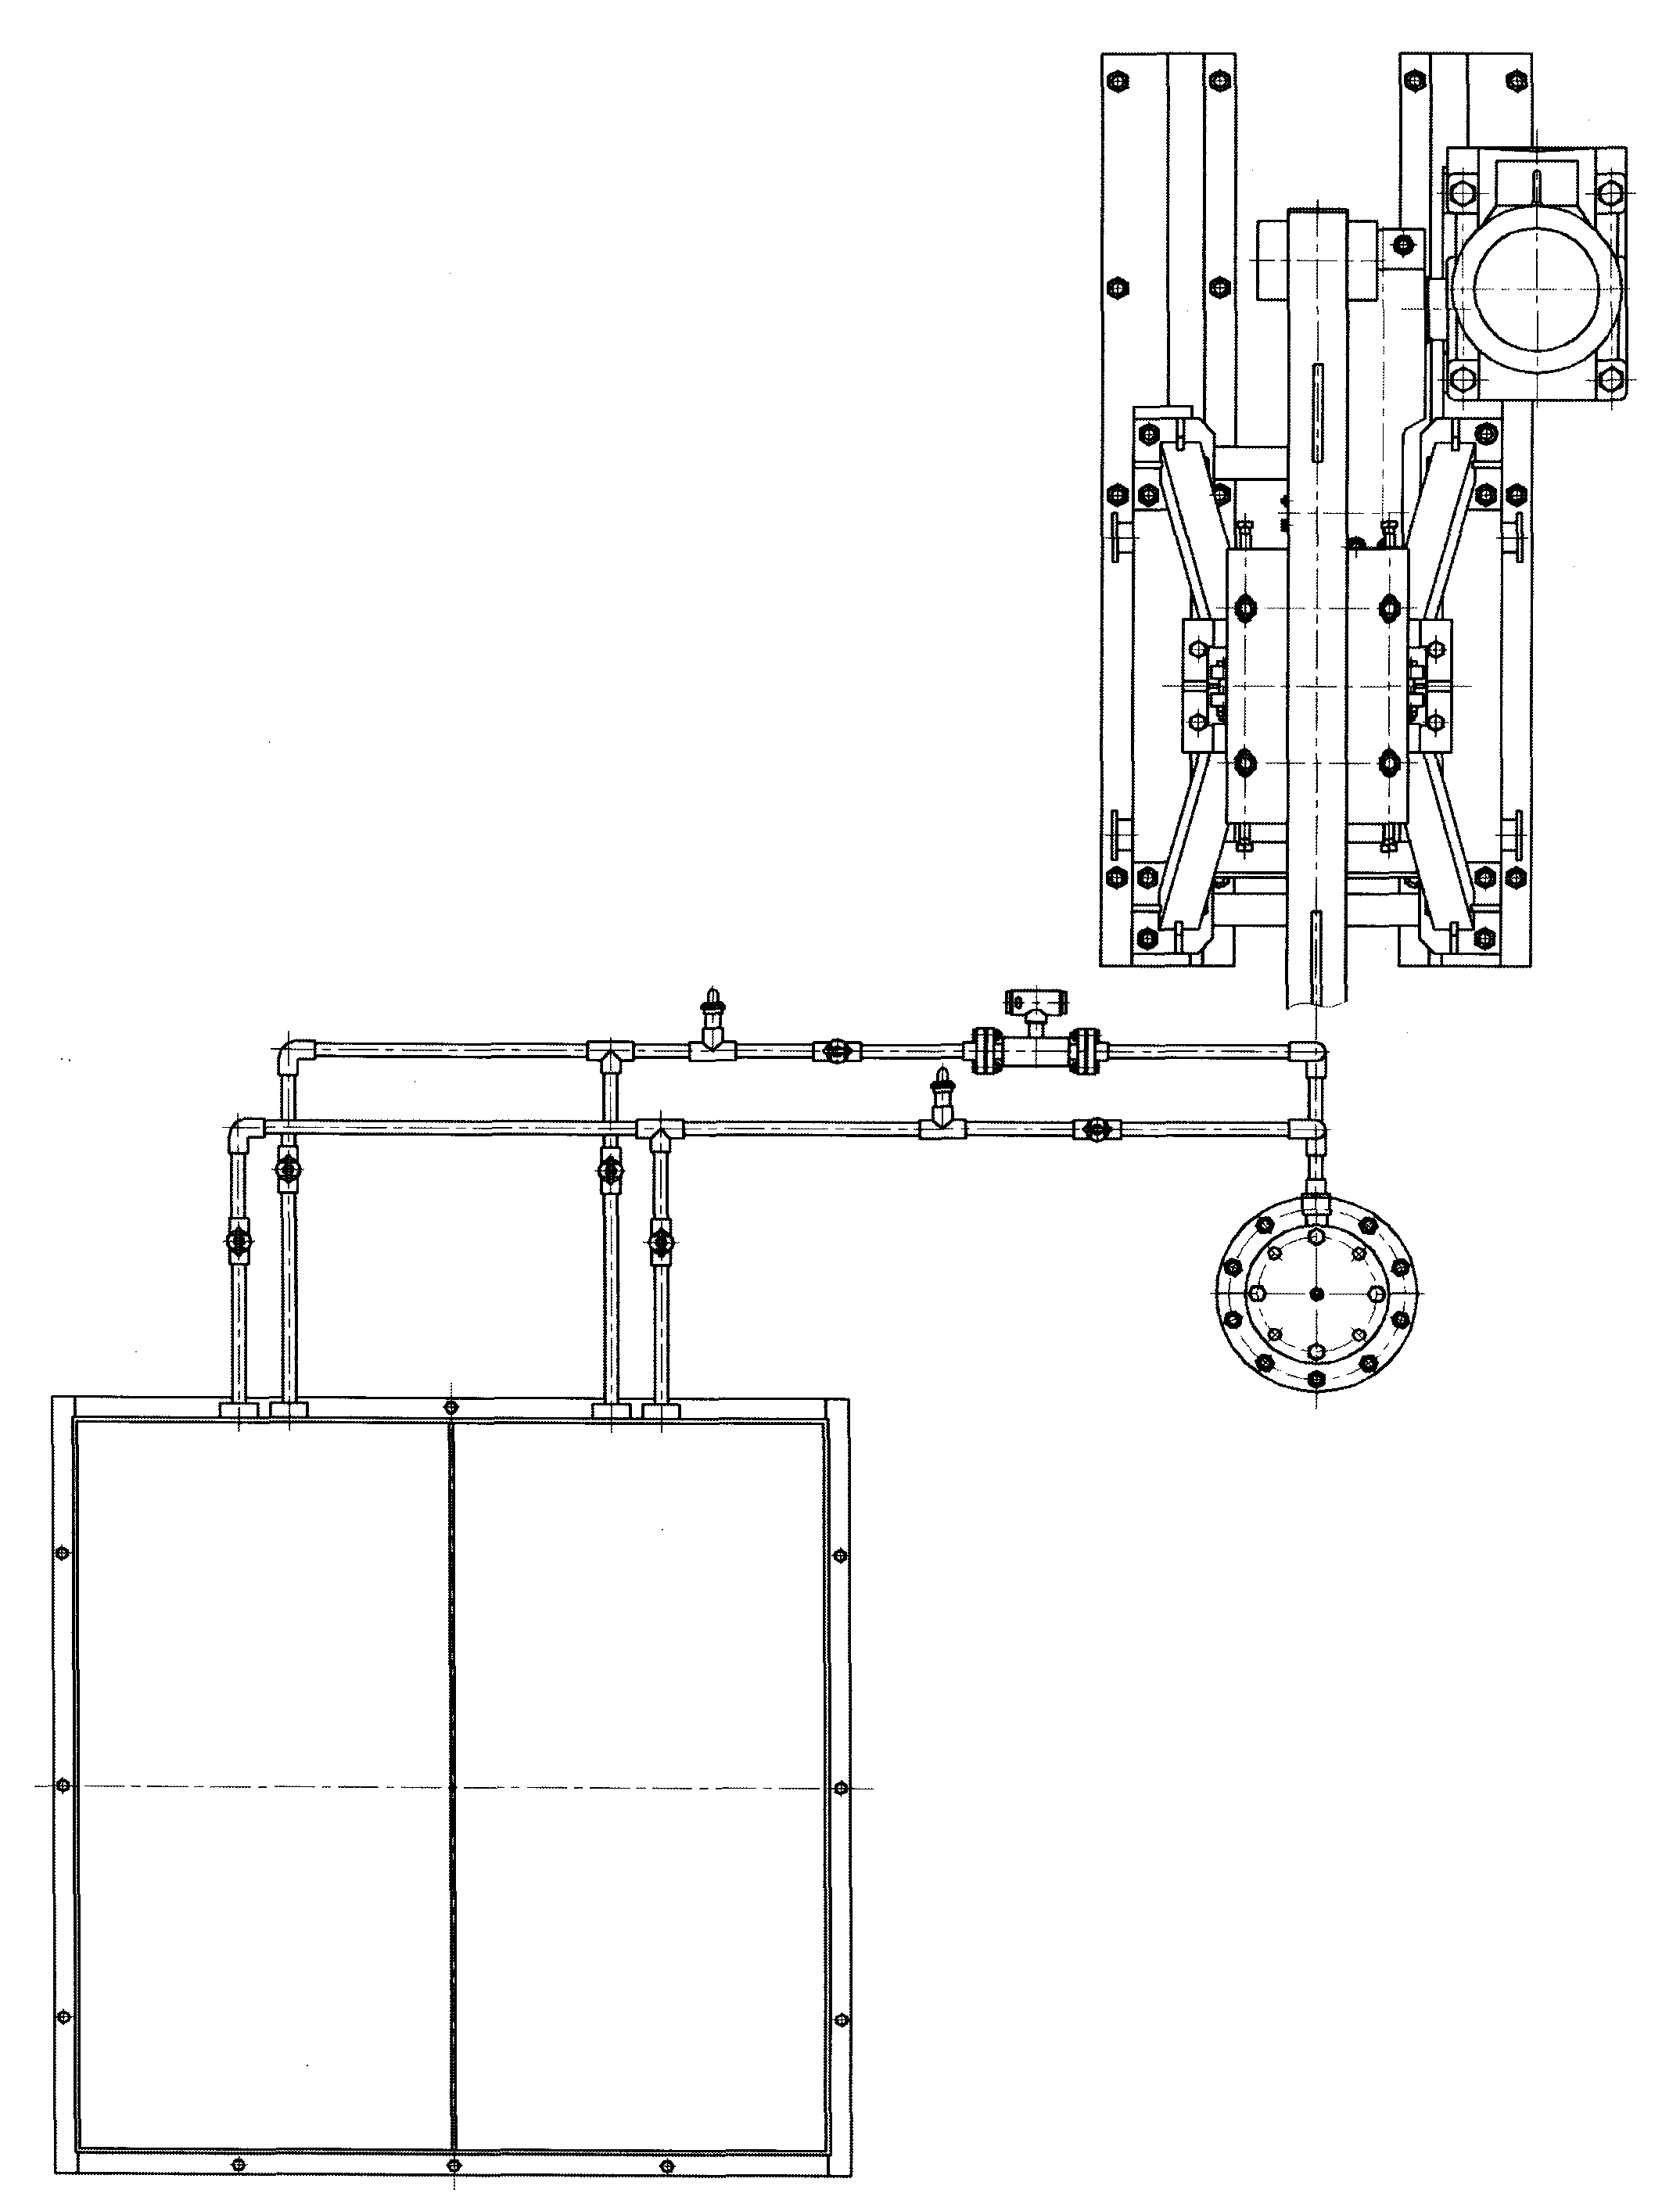 Water drainage and gas production simulated experimental device